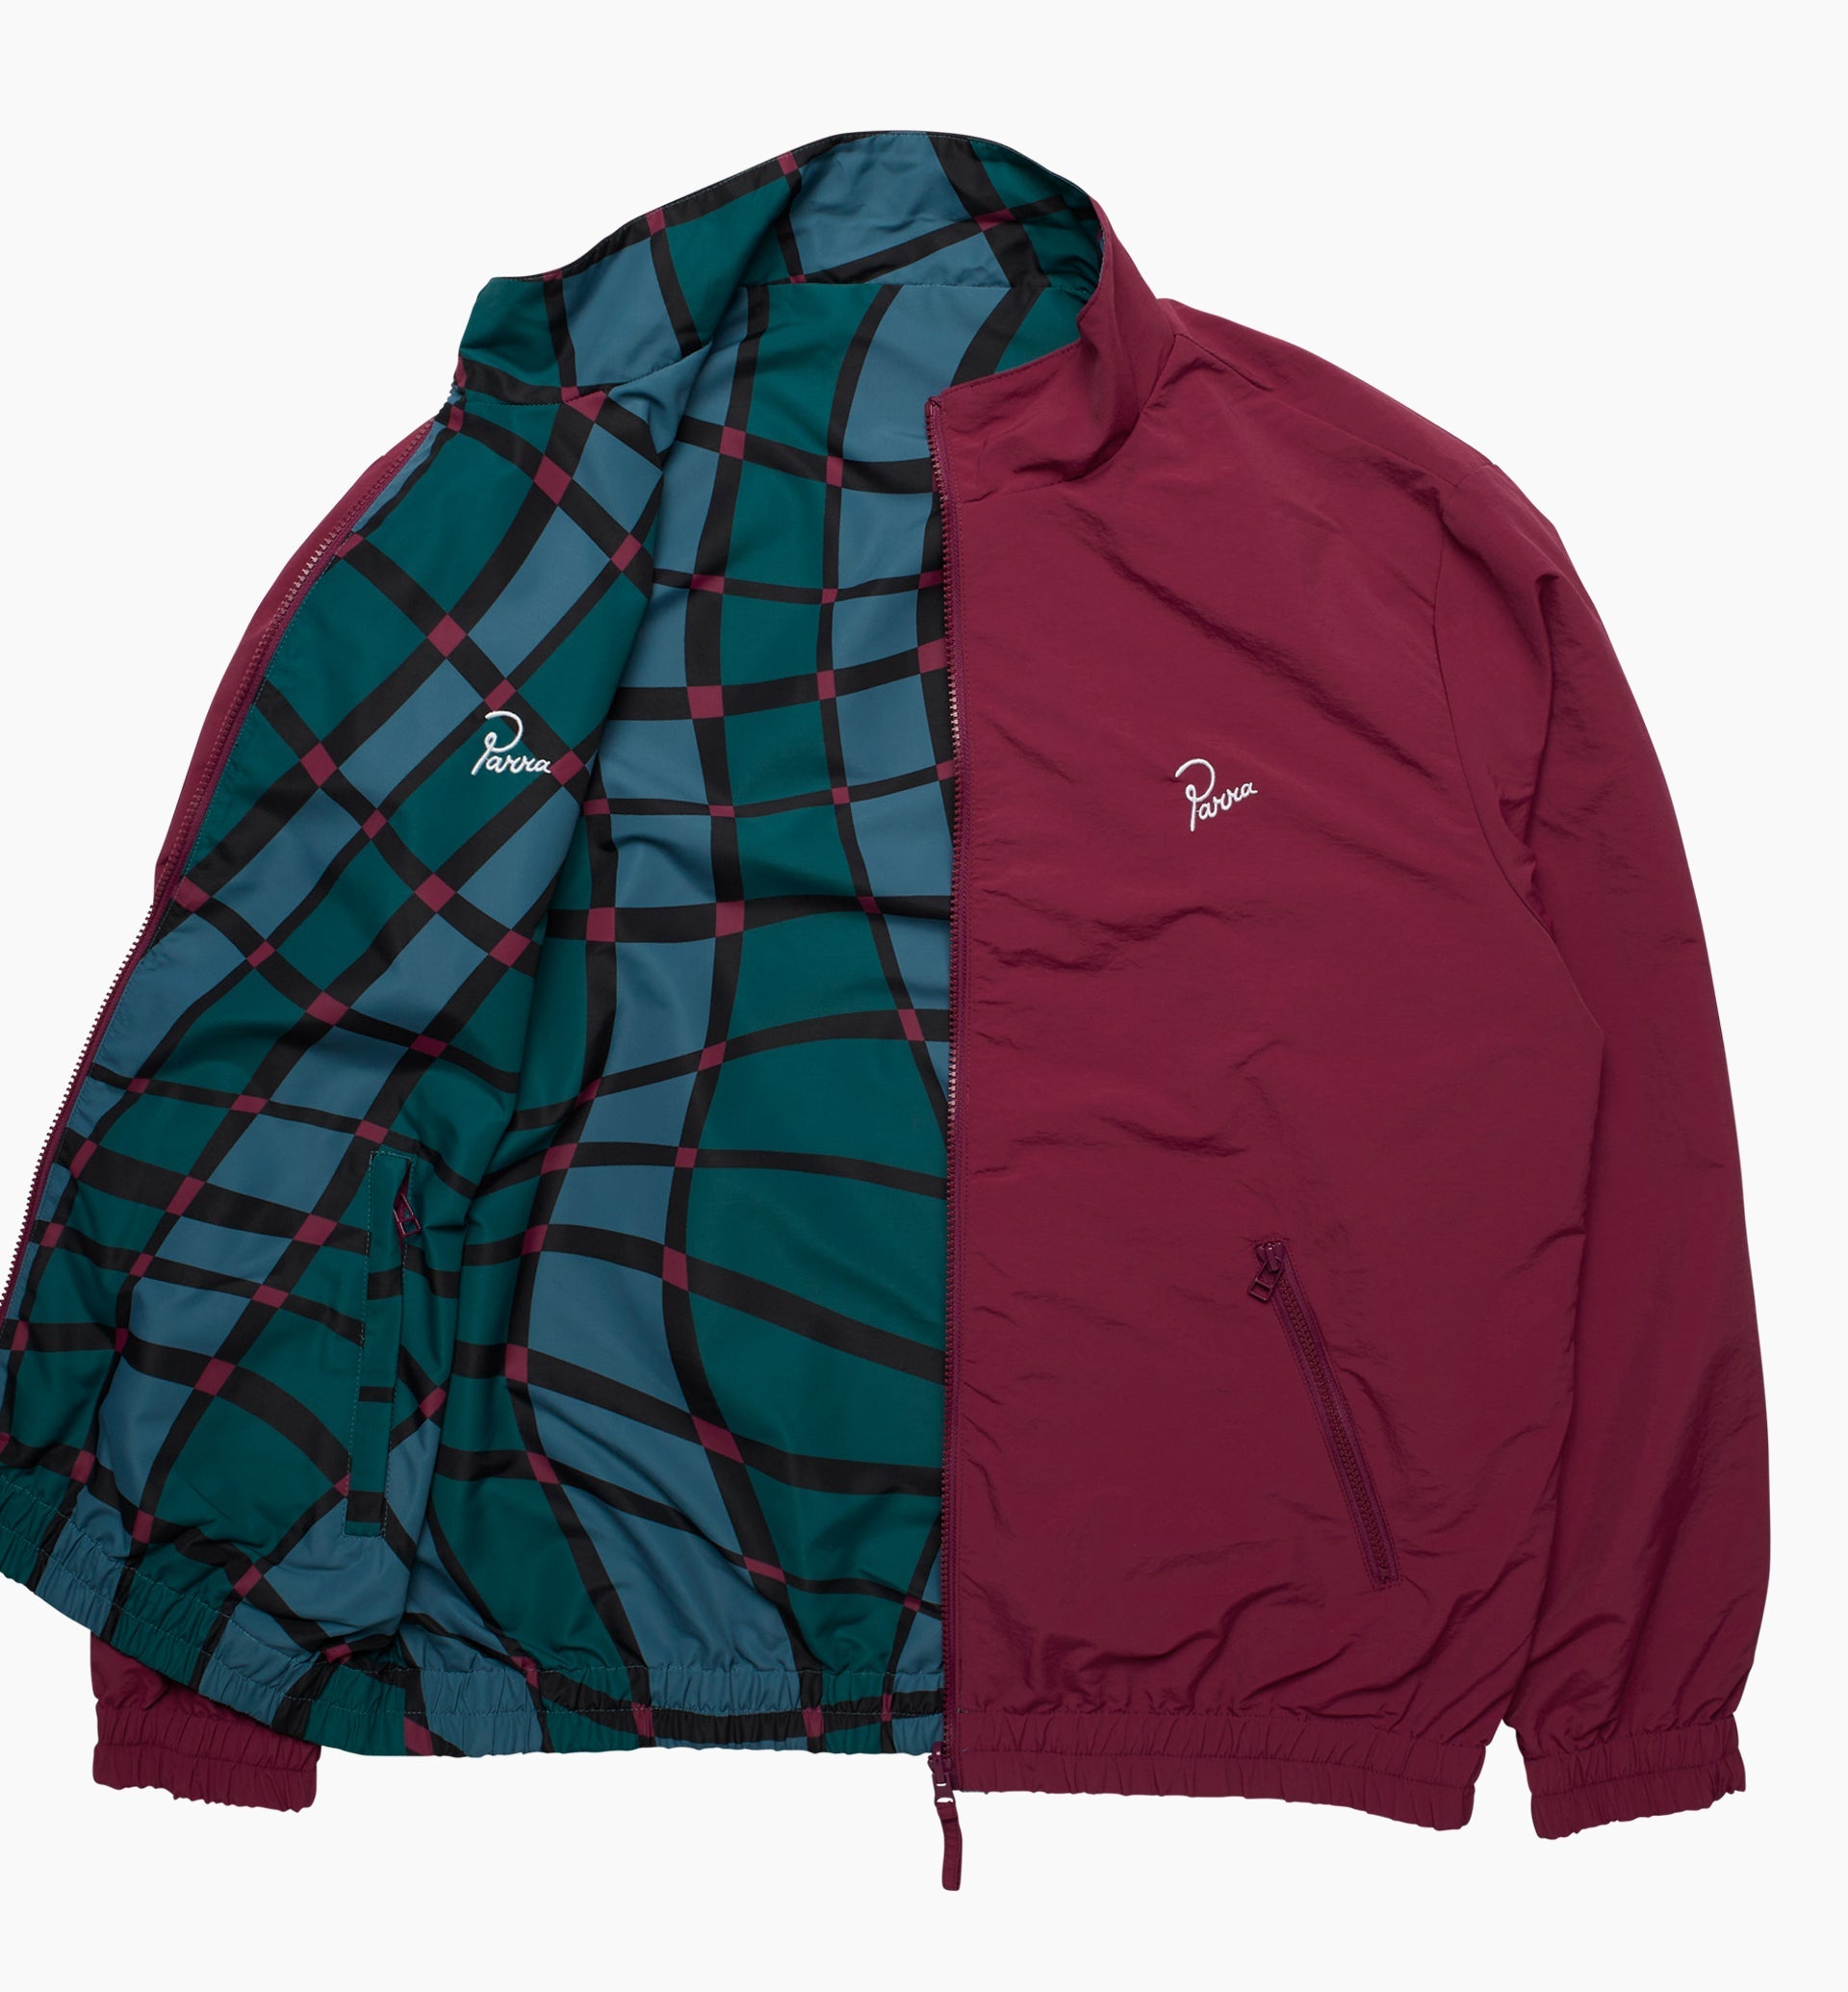 Parra - squared waves pattern track top